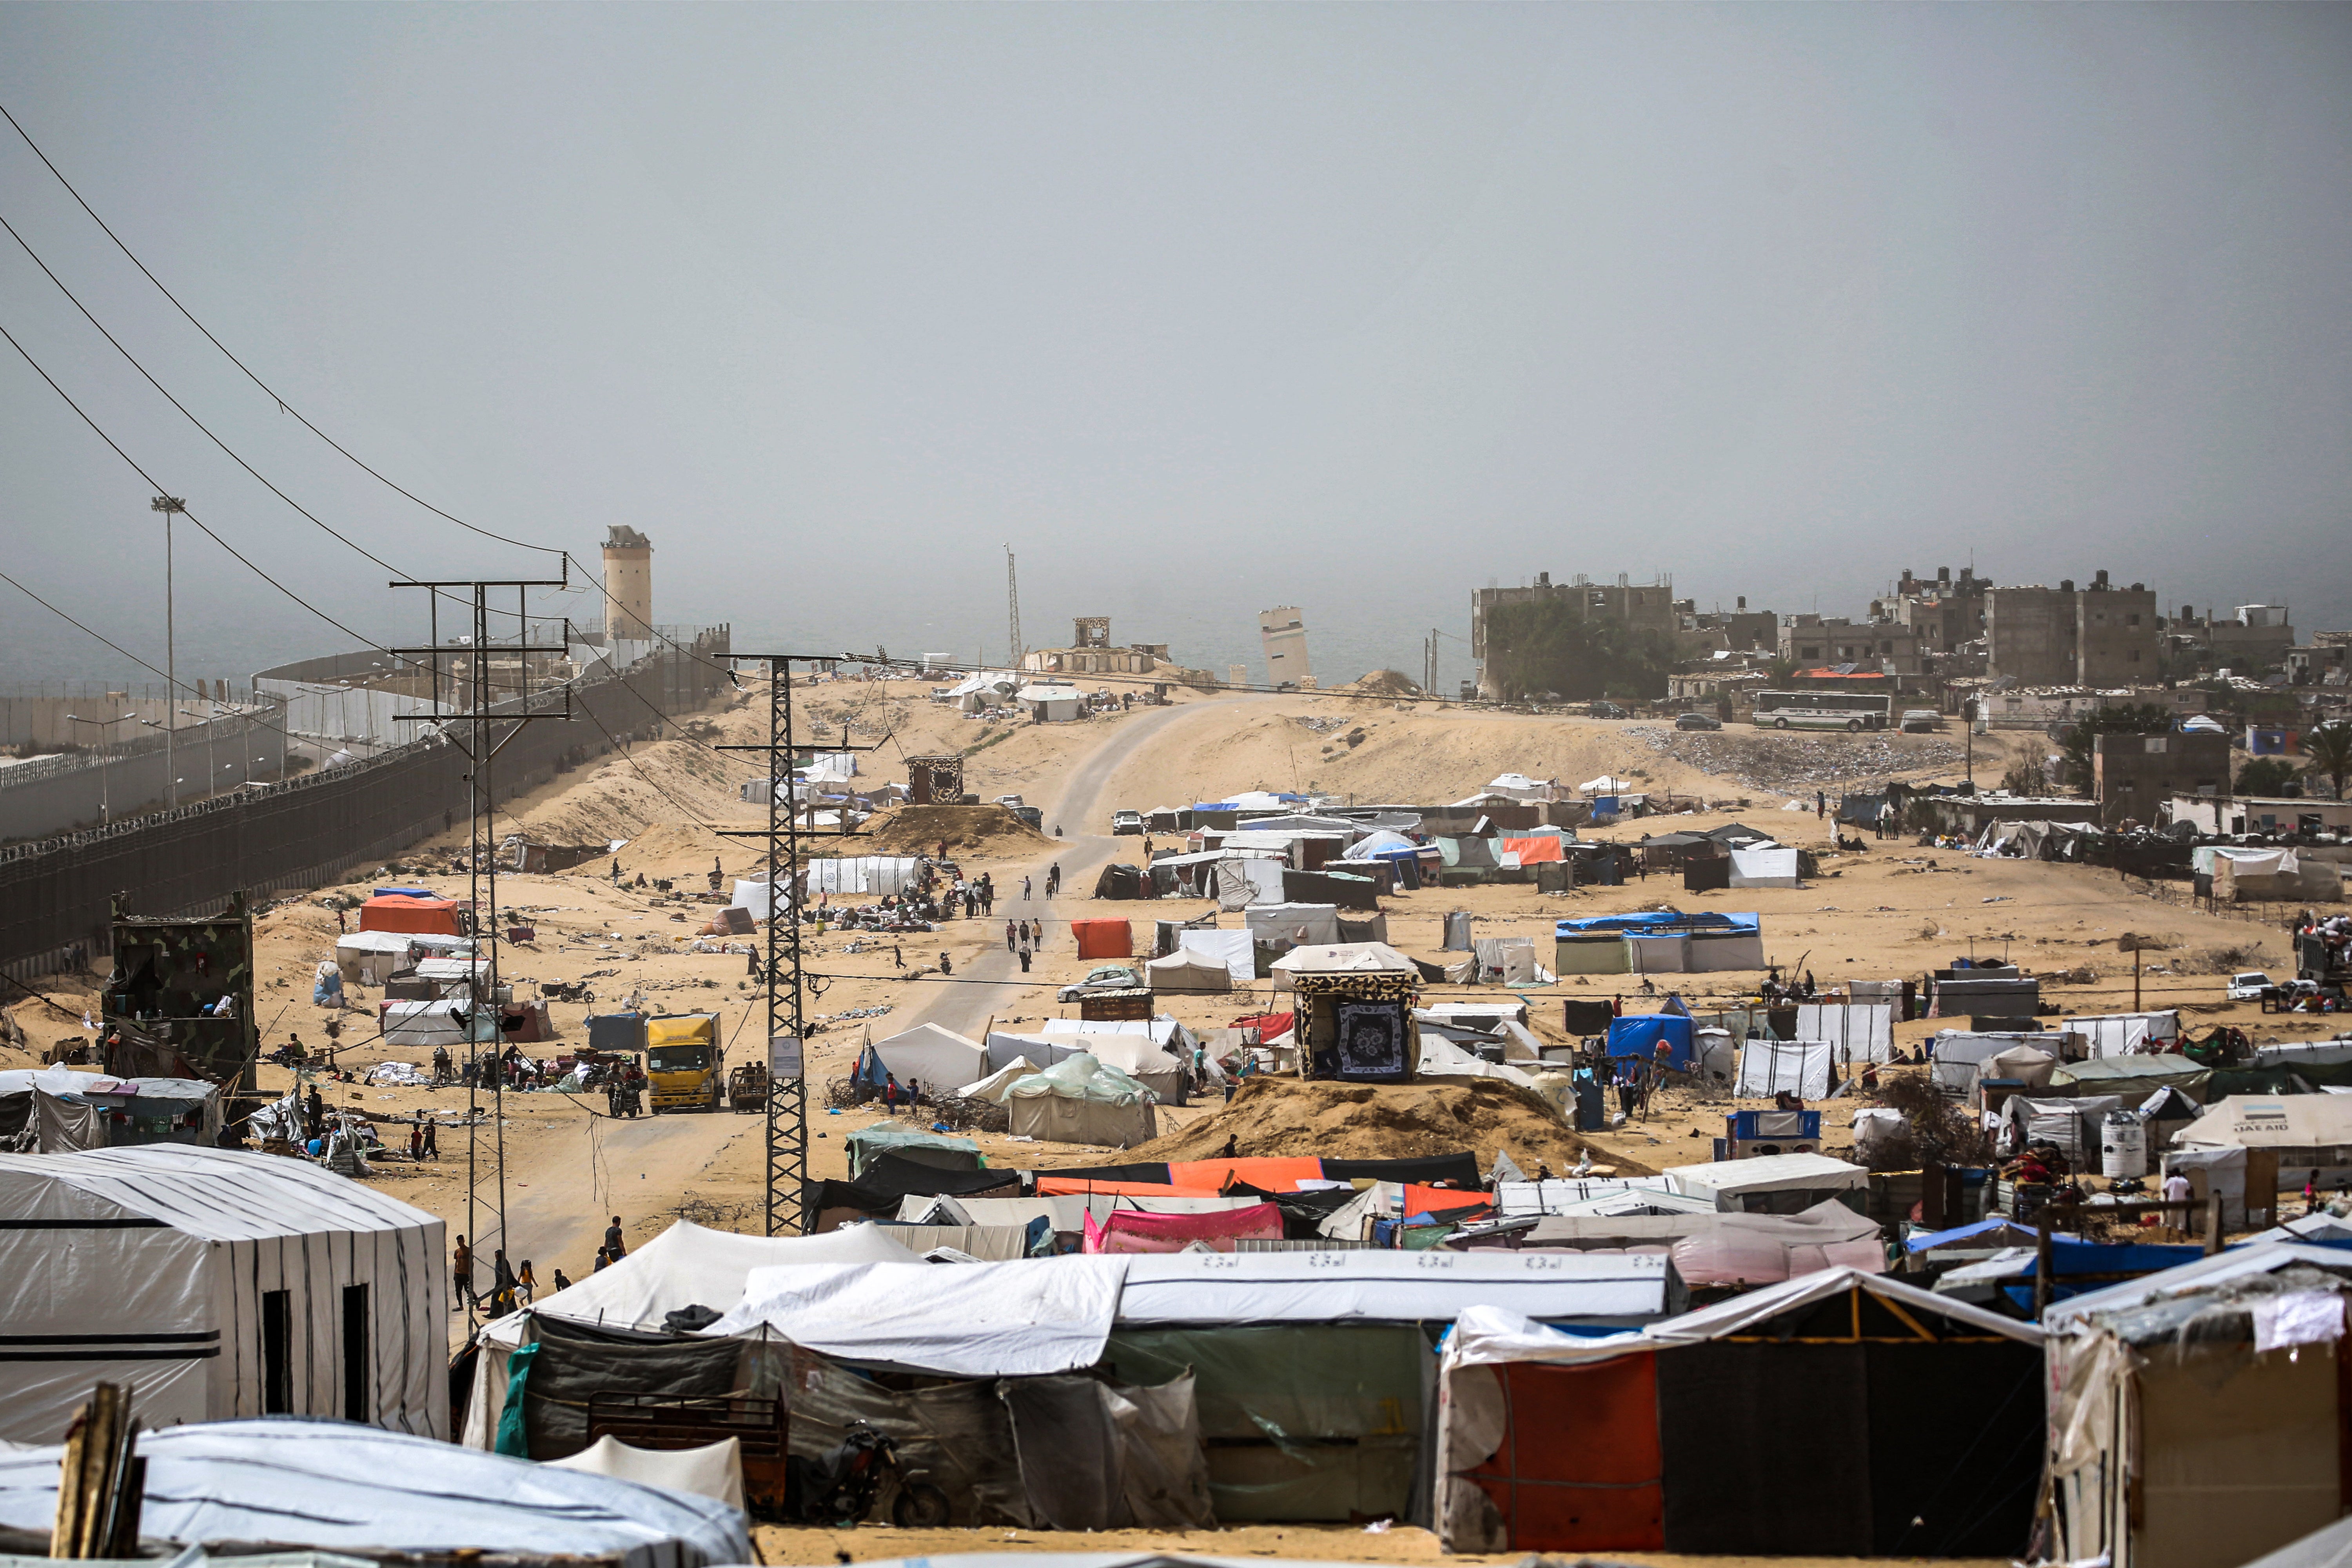 Tent encampments housing displaced Palestinians can be seen in Rafah in the southern Gaza Strip by the border fence with Egypt